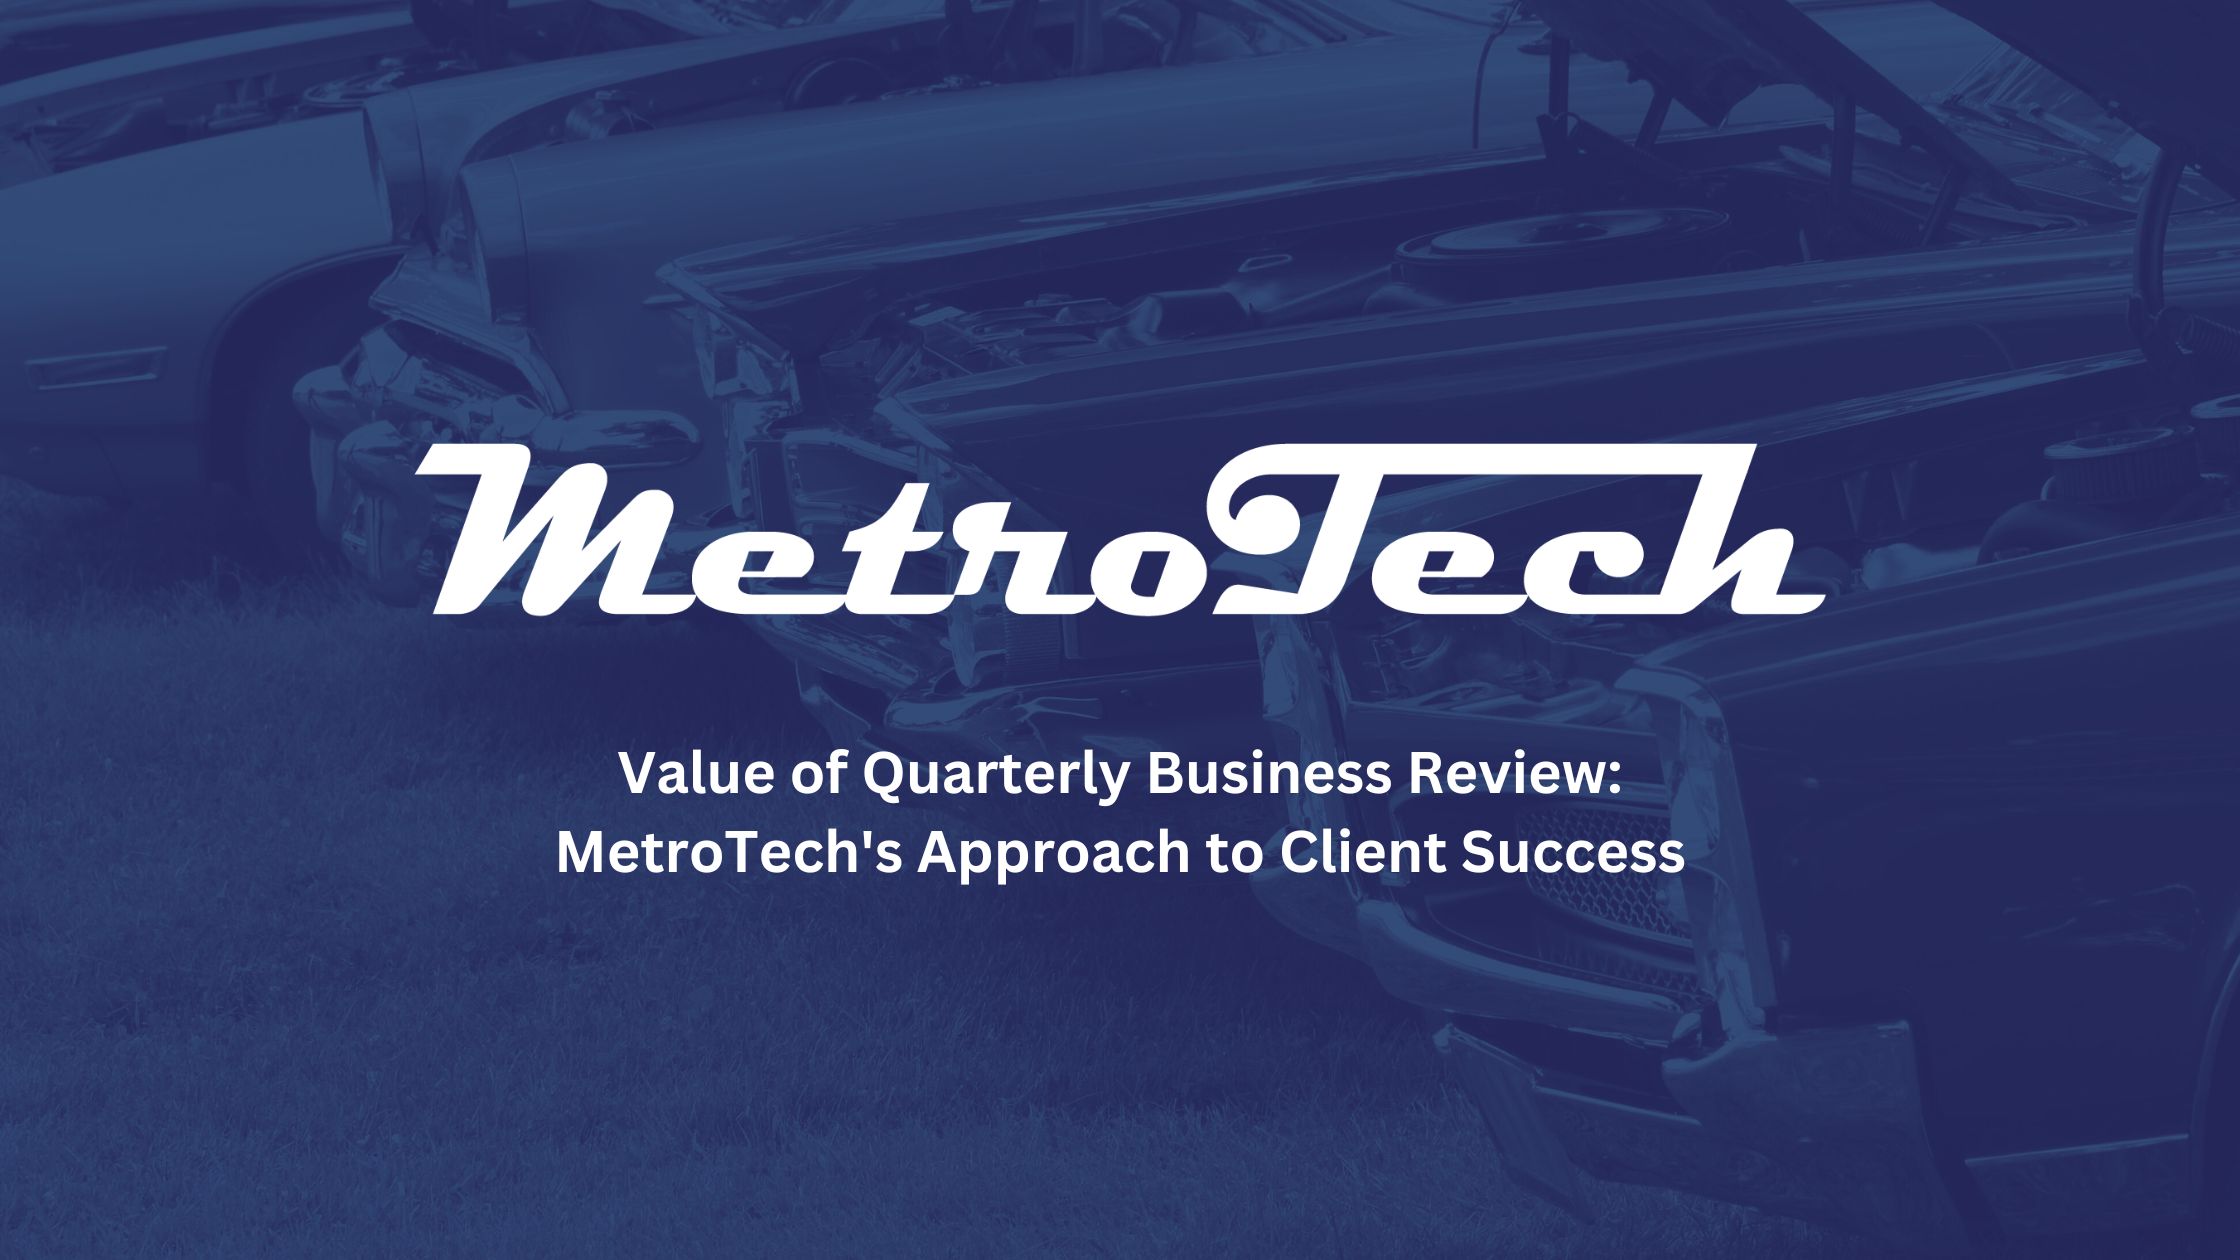 Value of Quarterly Business Review: MetroTech’s Approach to Client Success